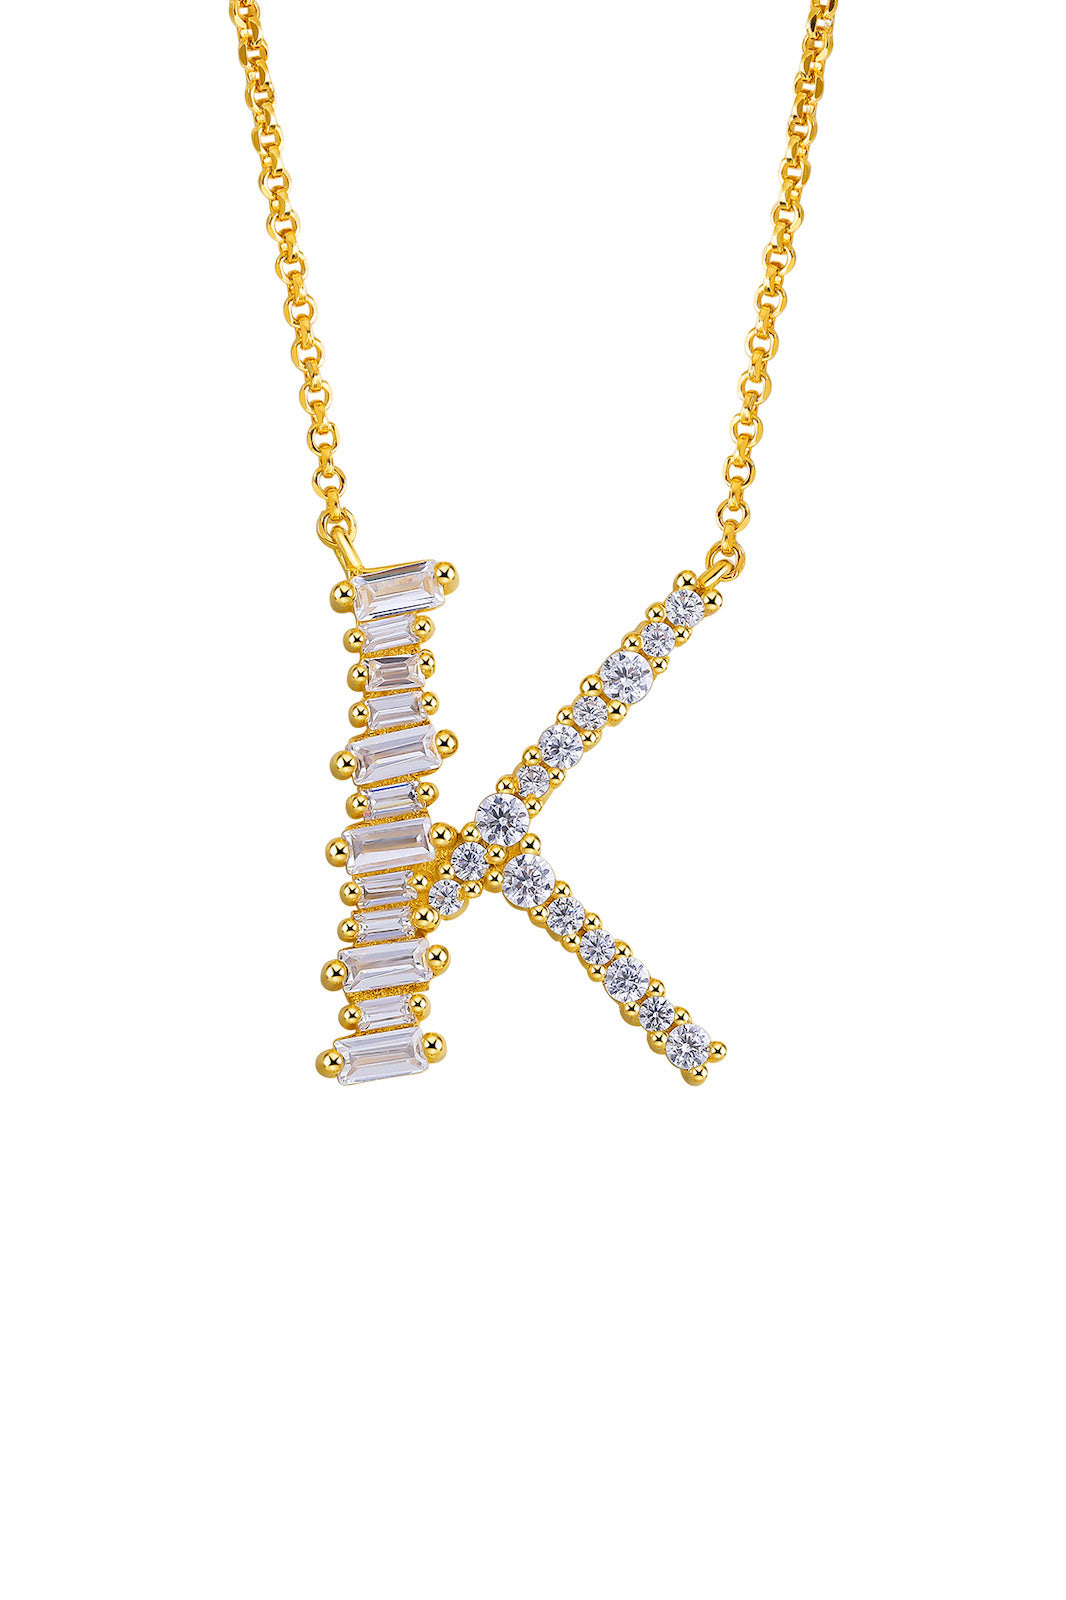 Gold Plated Sterling Silver Initial Necklace - Letter K Detail